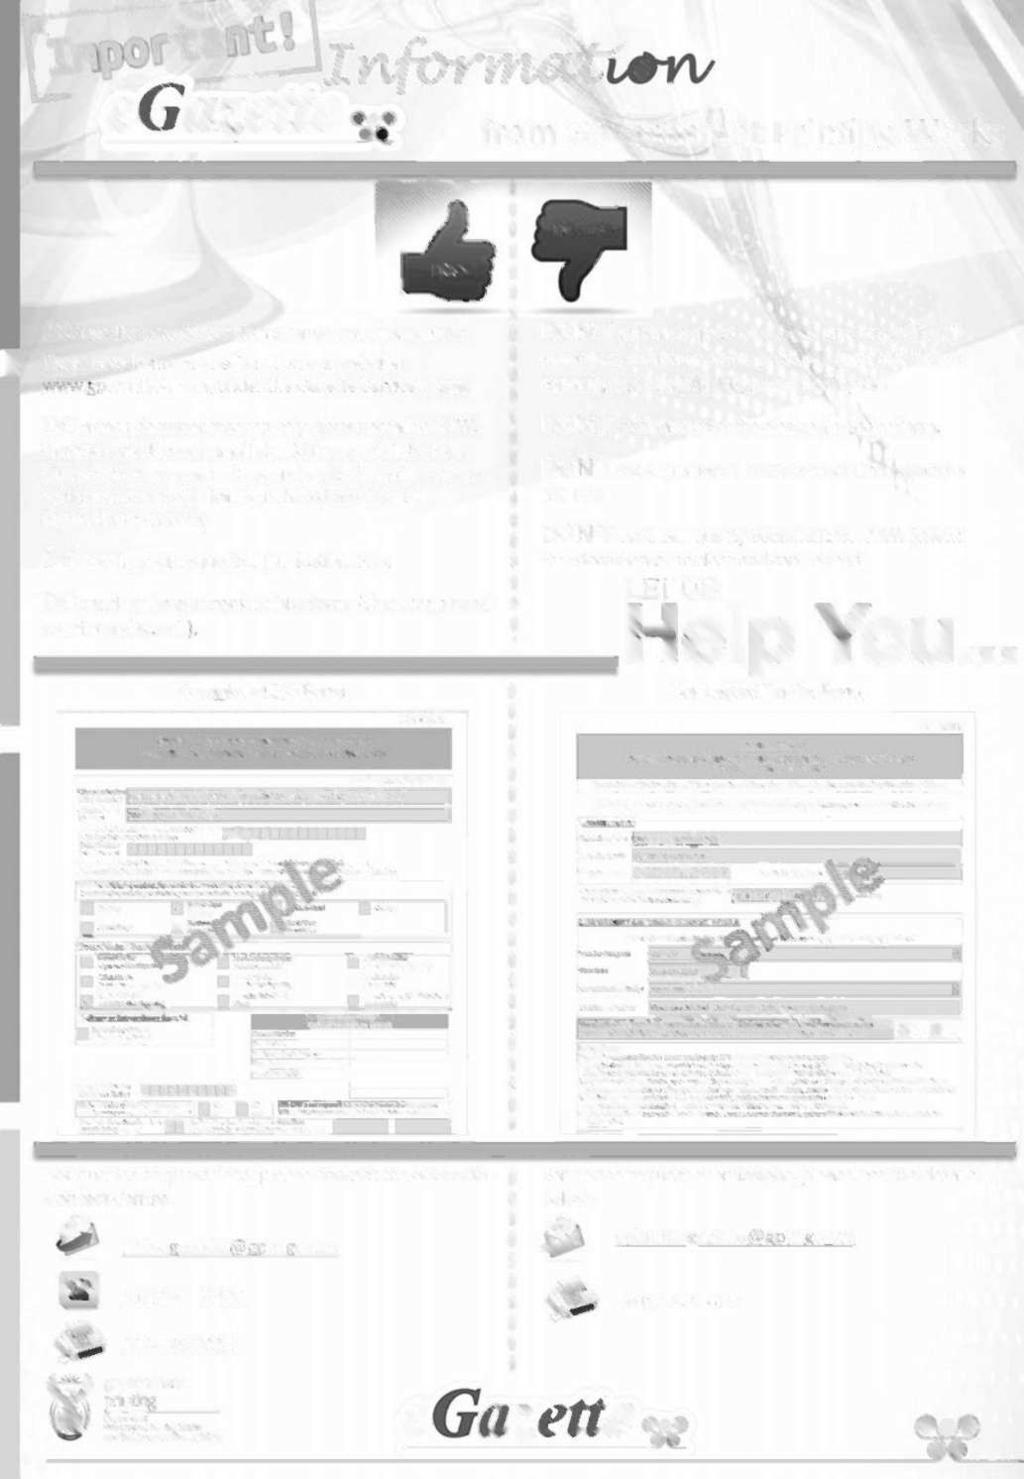 2 No. 2491 PROVINCIAL GAZETTE, 27 MARCH 2015 egazette I nitheittaruniev from Government Printing Works DON'TS DO use the new Adobe Forms for your notice request.